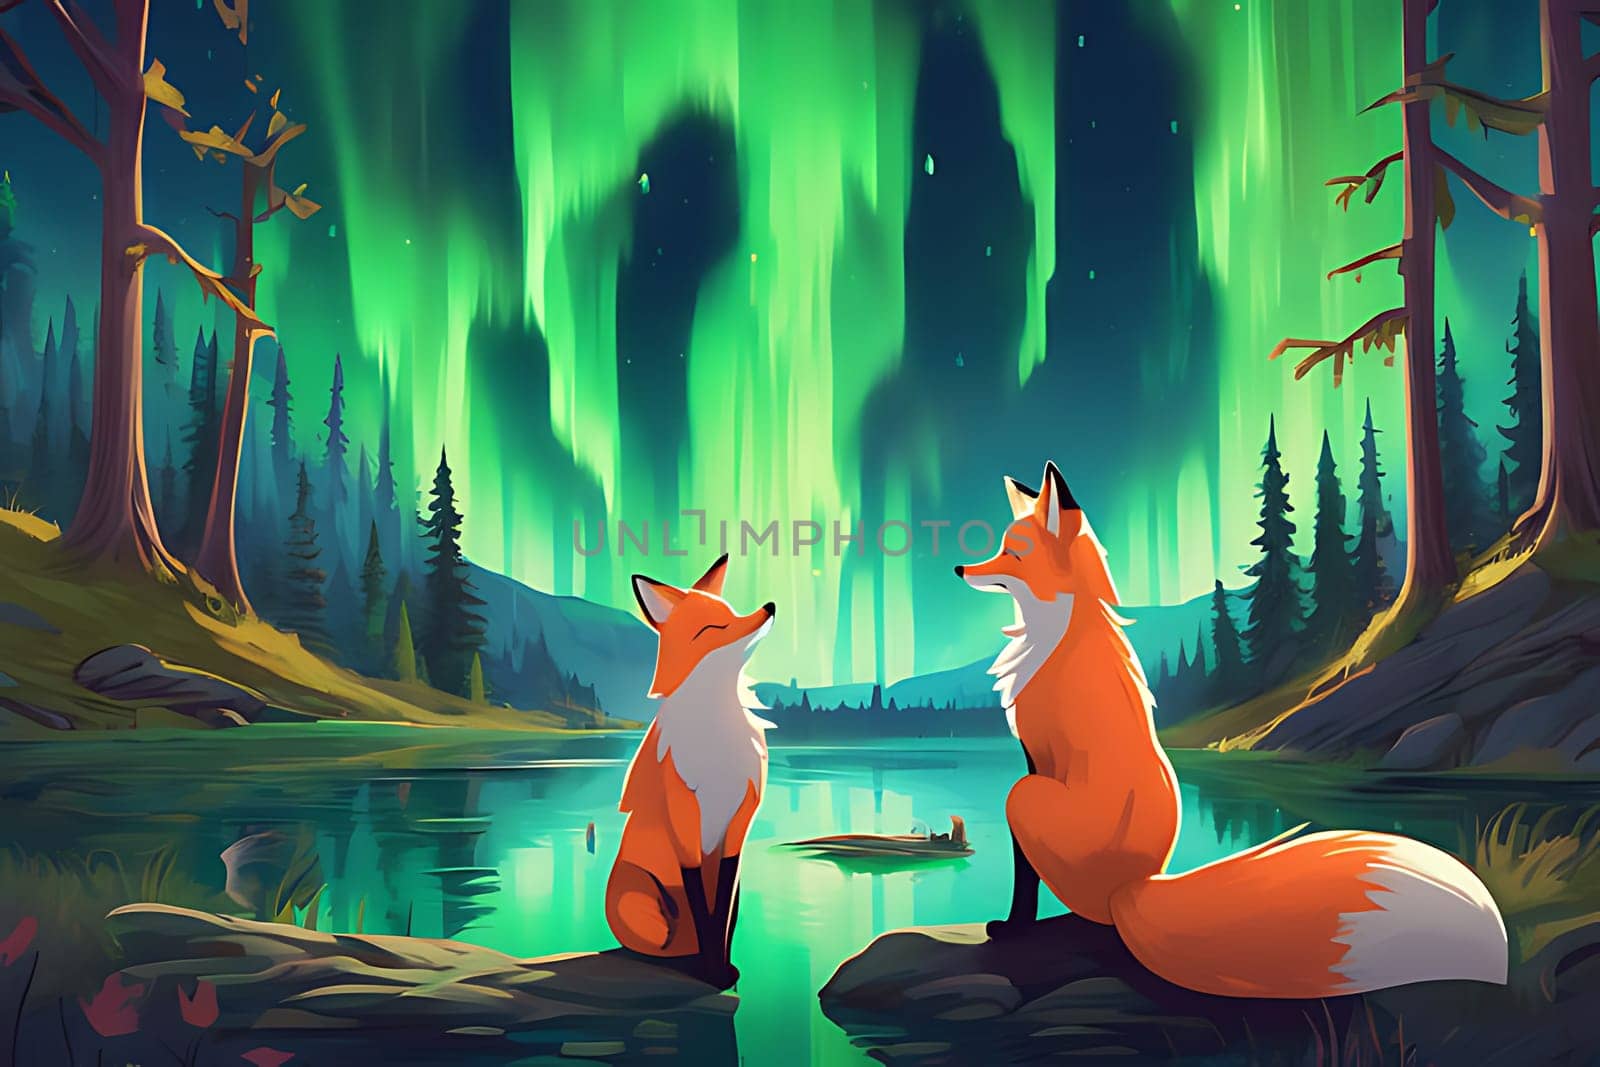 A pair of foxes are seen sitting closely side by side, their furry coats blending in with the surrounding environment. The foxes appear calm and attentive as they rest next to each other.